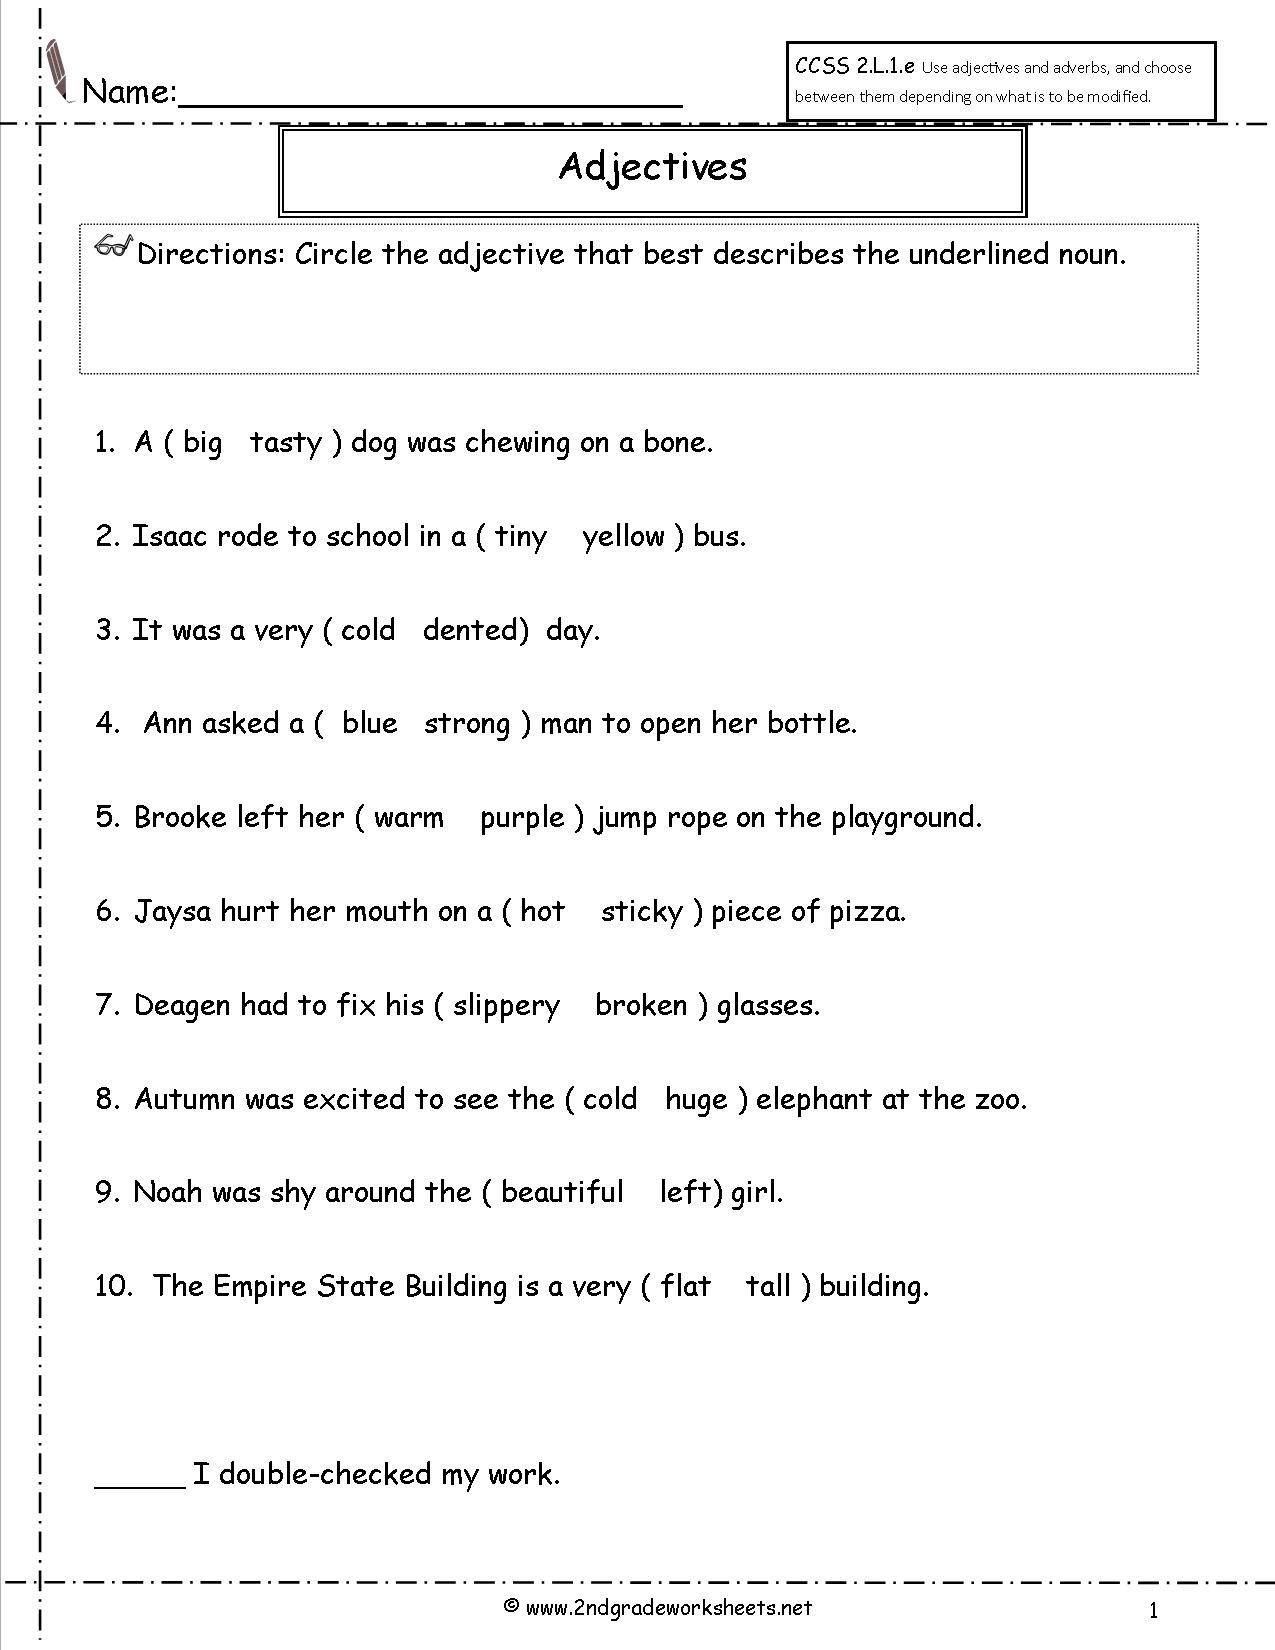 16-best-images-of-adjectives-exercises-worksheets-printable-adjective